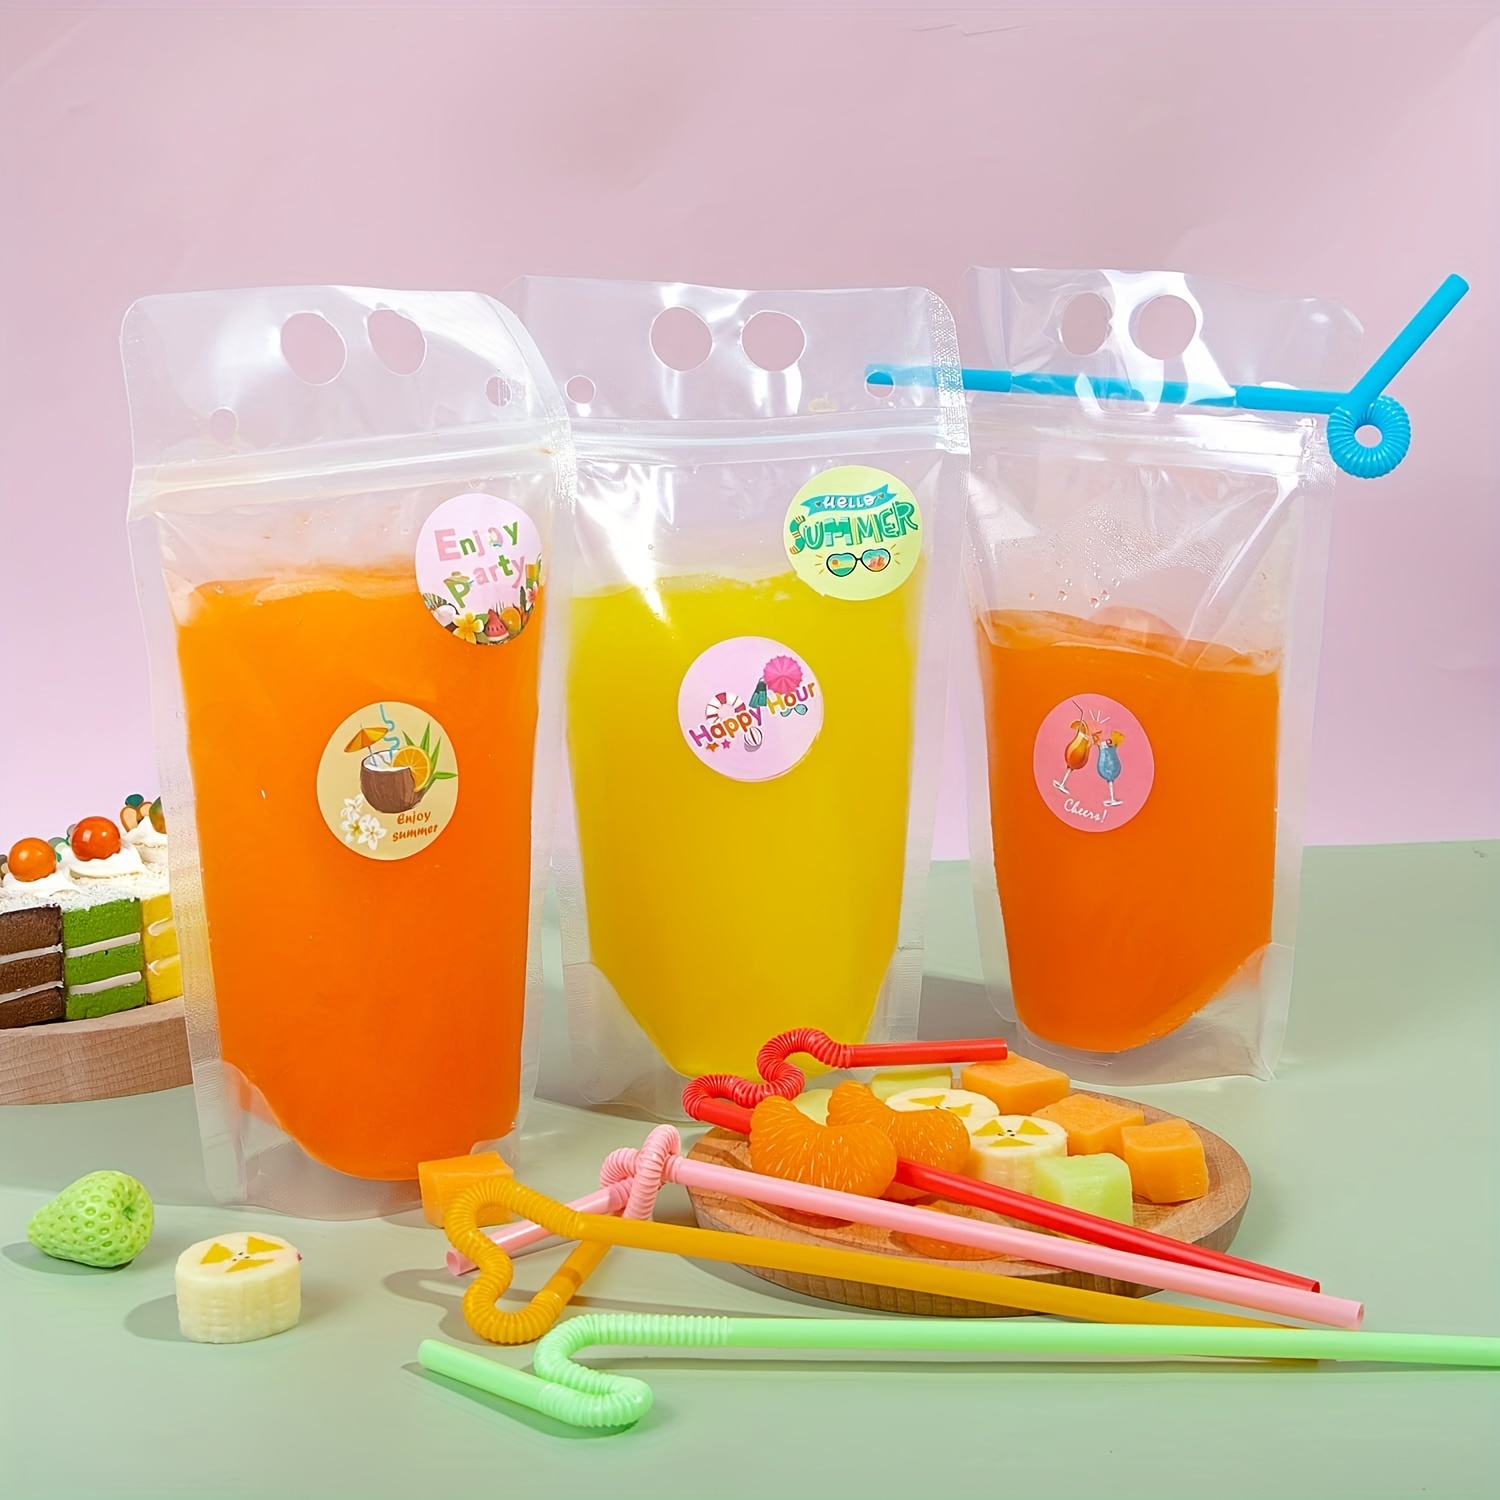 10pcs Drink Pouches(Without straw) - Perfect For Cold & Hot Drinks For  Adults & Kids! 500ml Reusable Juice Bags - Clear Drink Pouches With  Disposable For Easy Storage, Reusable Juice Bags 